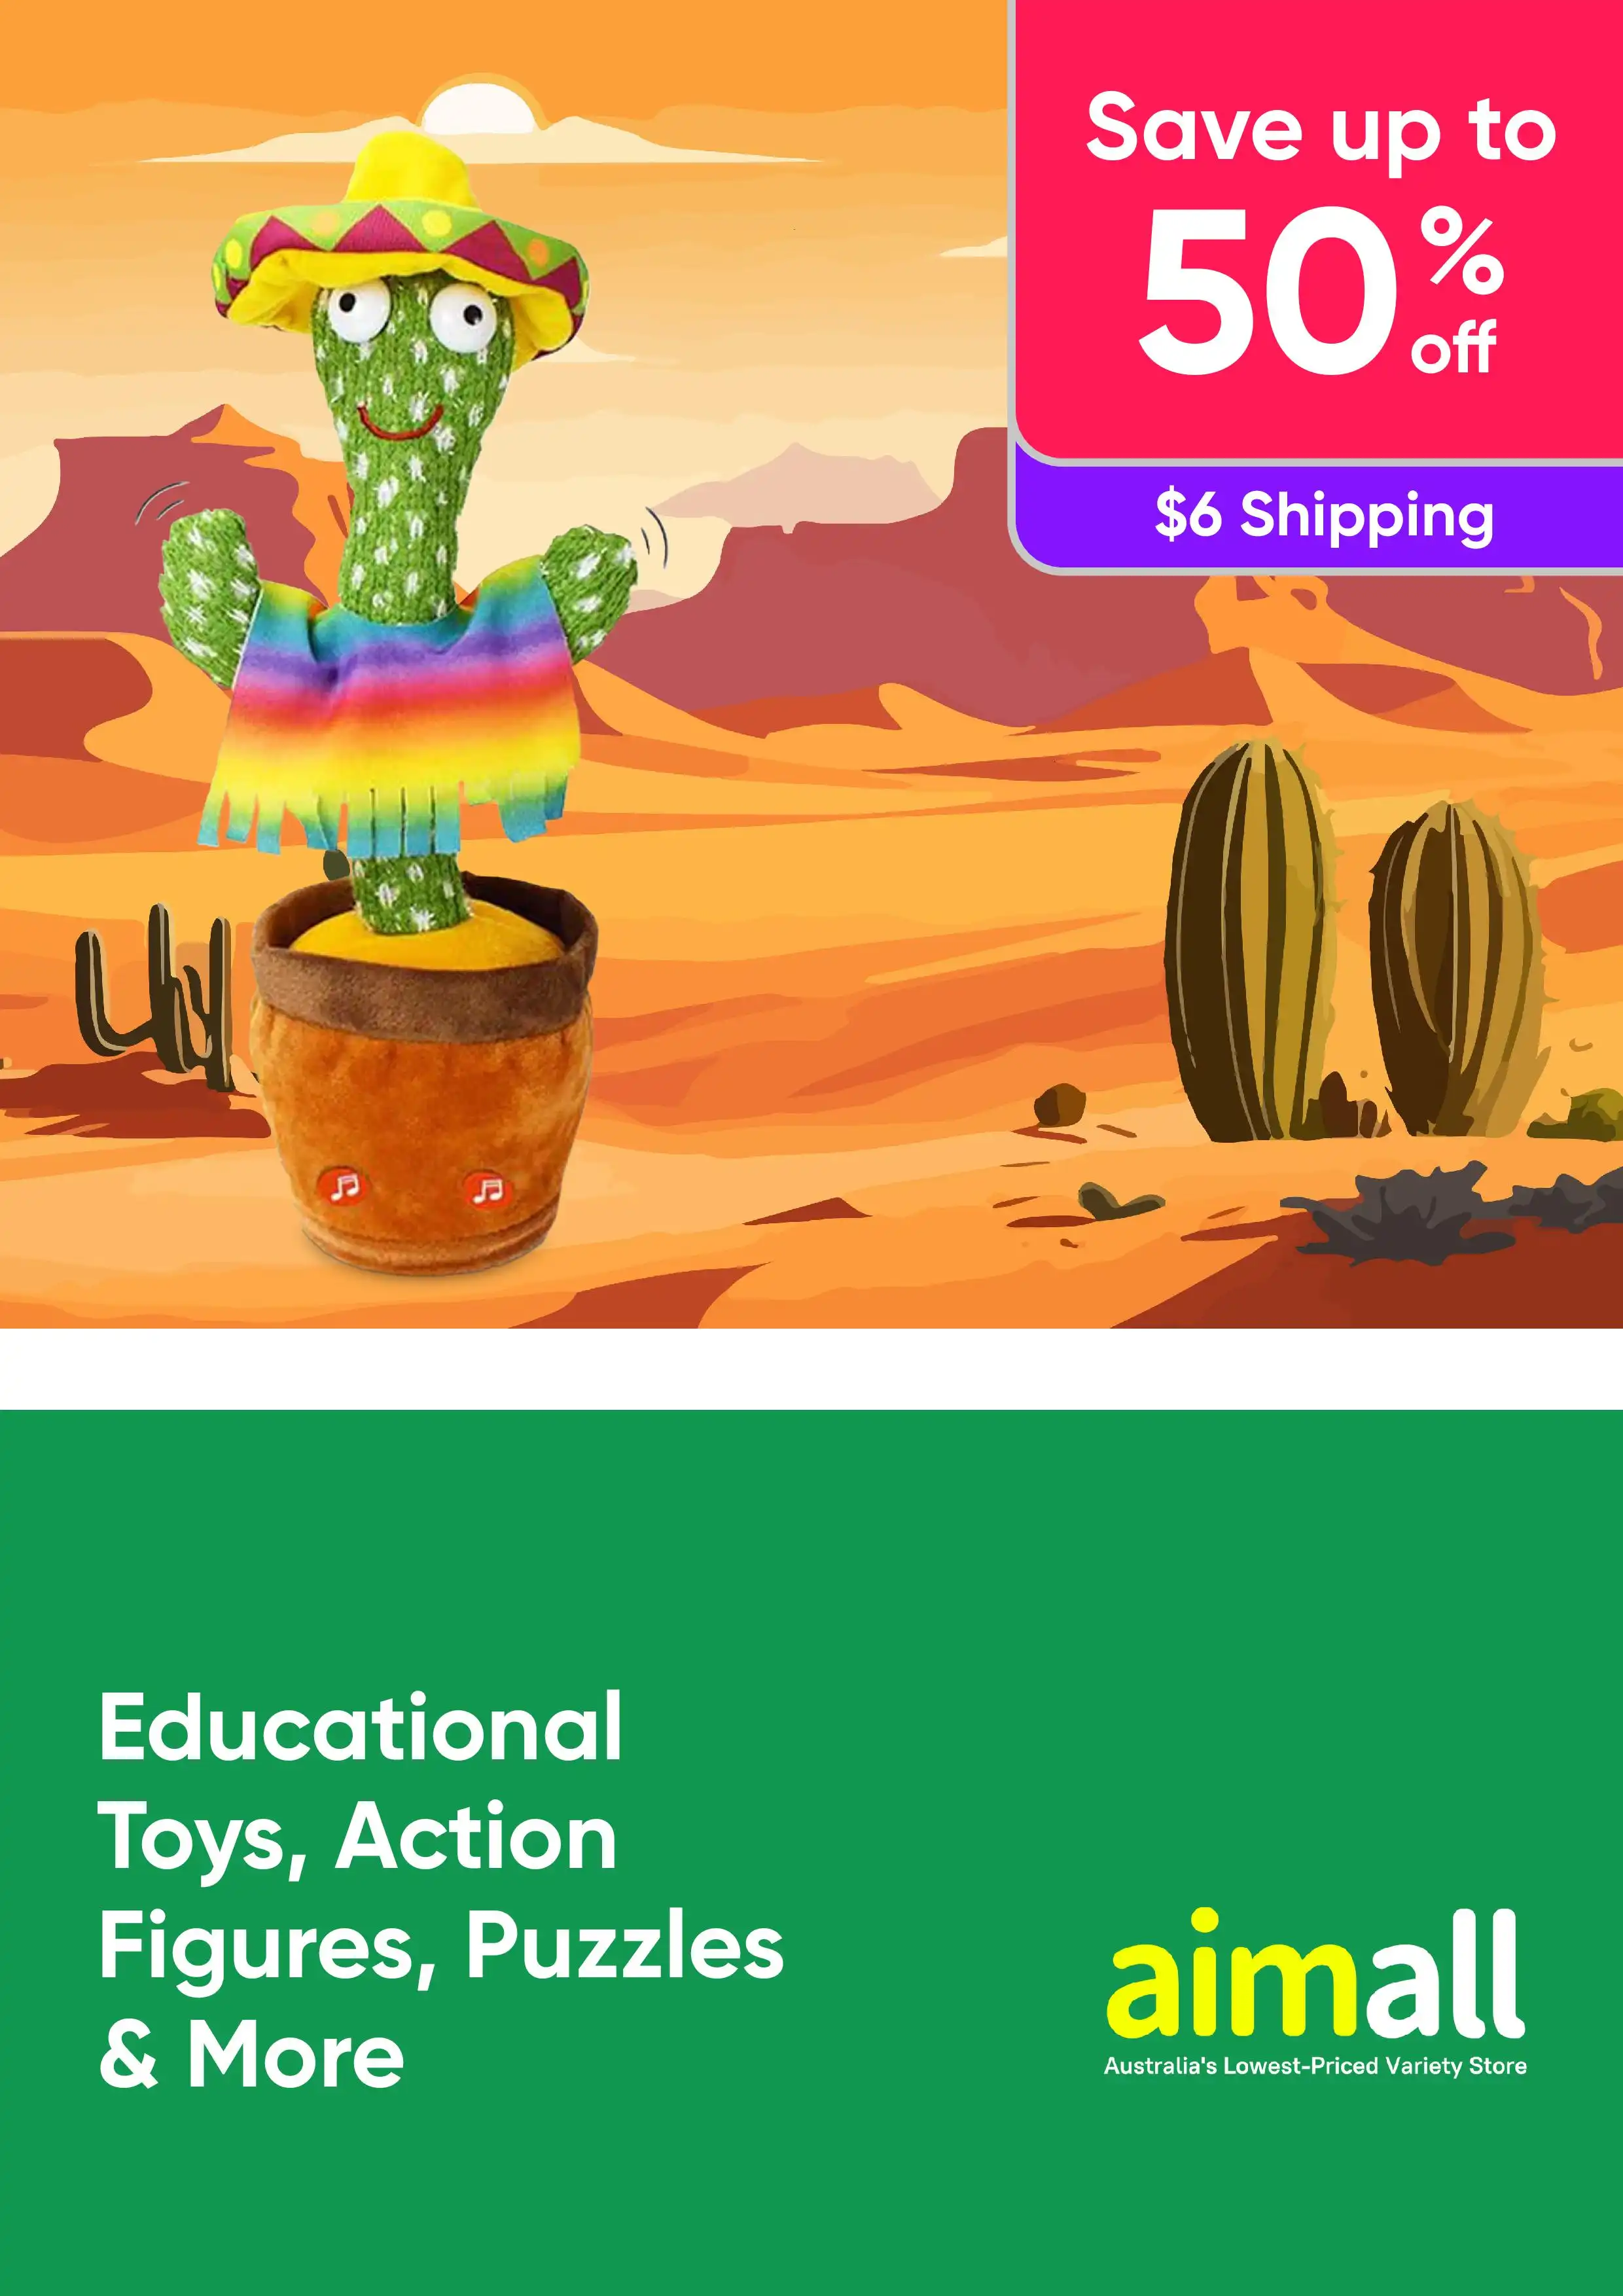 50% Off selected Education Toys, Action Figures, Puzzles and more